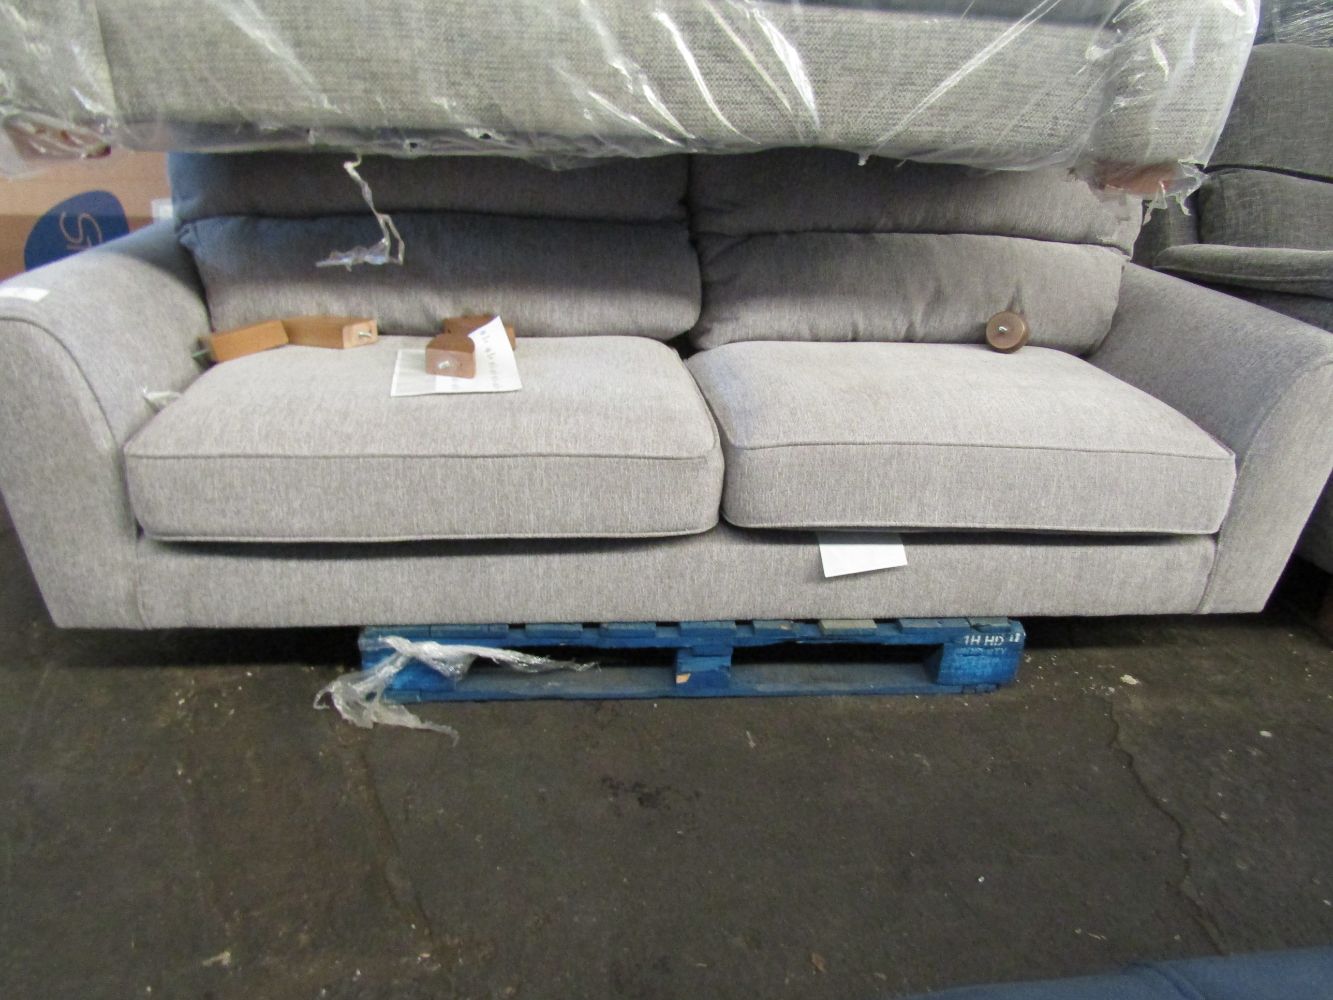 New lots added this afternoon to Sofas and Chairs from SCS, Swoon, Oak furniture land and more.